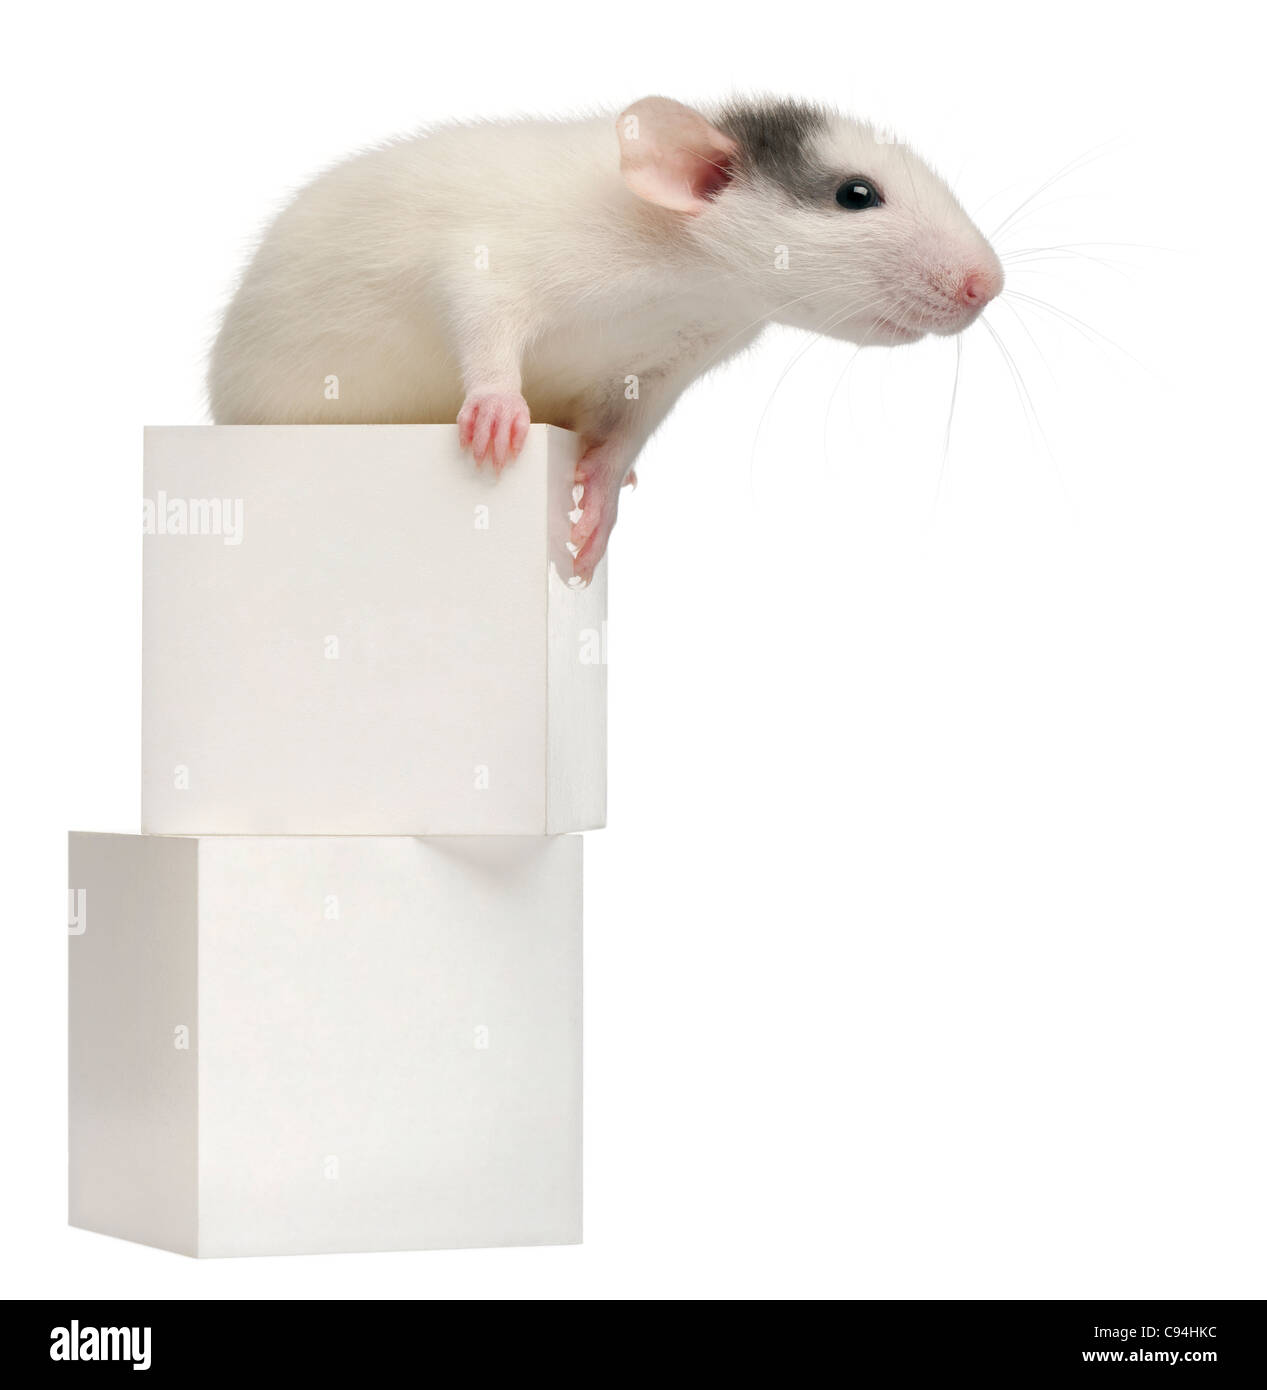 Common rat or sewer rat or wharf rat, Rattus norvegicus, 4 months old, on box, in front of white background Stock Photo